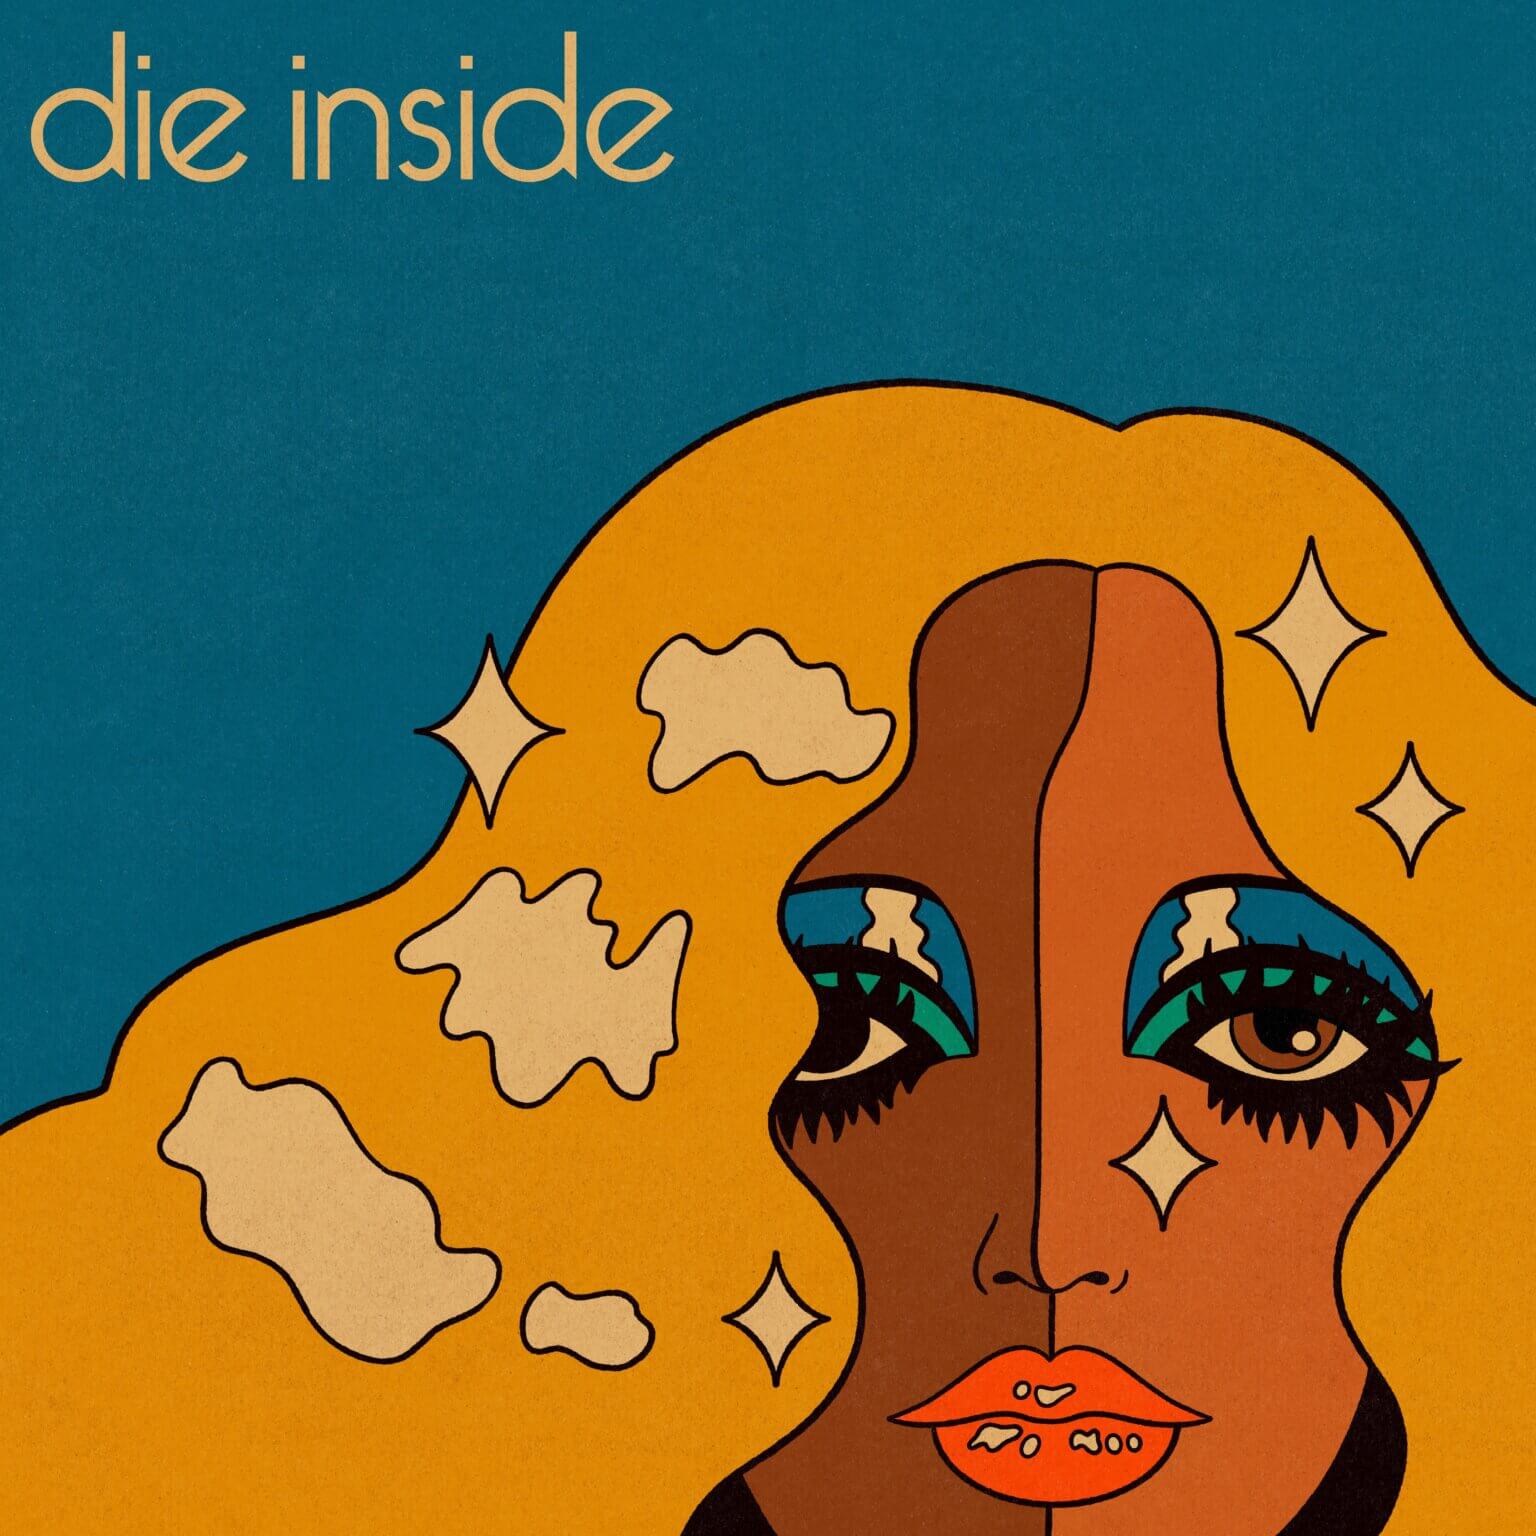 SUSU are pleased to announce a brand new release with the arrival of their single "Die Inside", a track their forthcoming album Call Susie